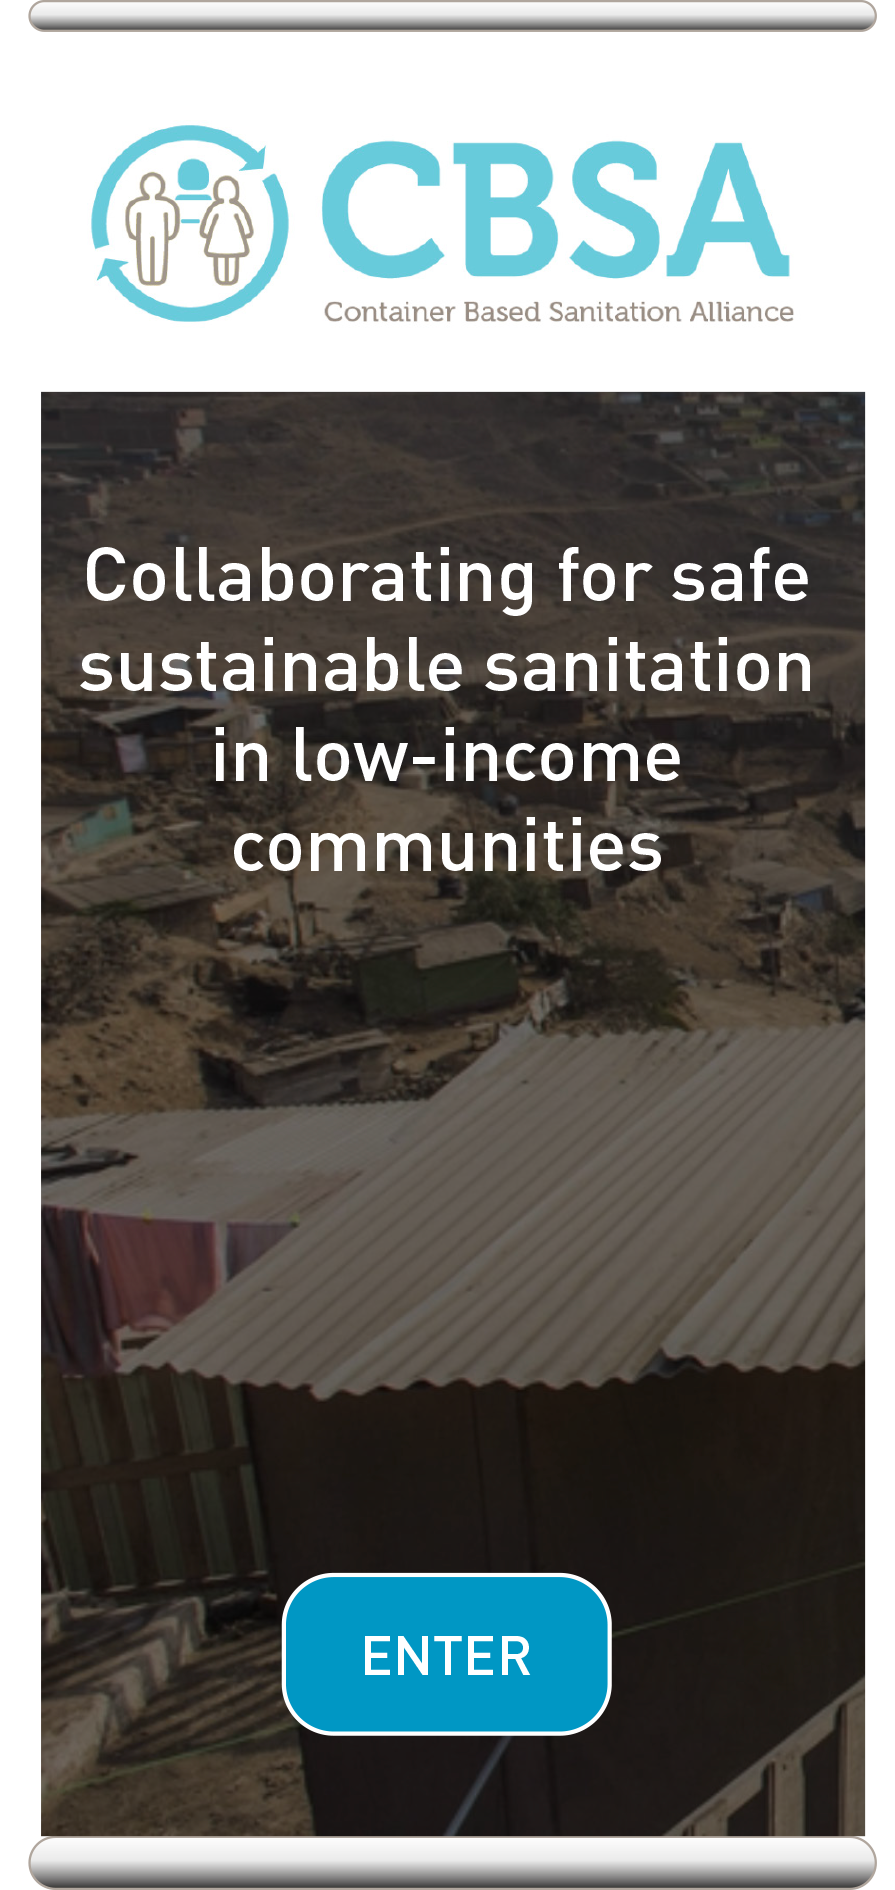 Click image to find out more about Container Based Sanitation Alliance (CBSA)